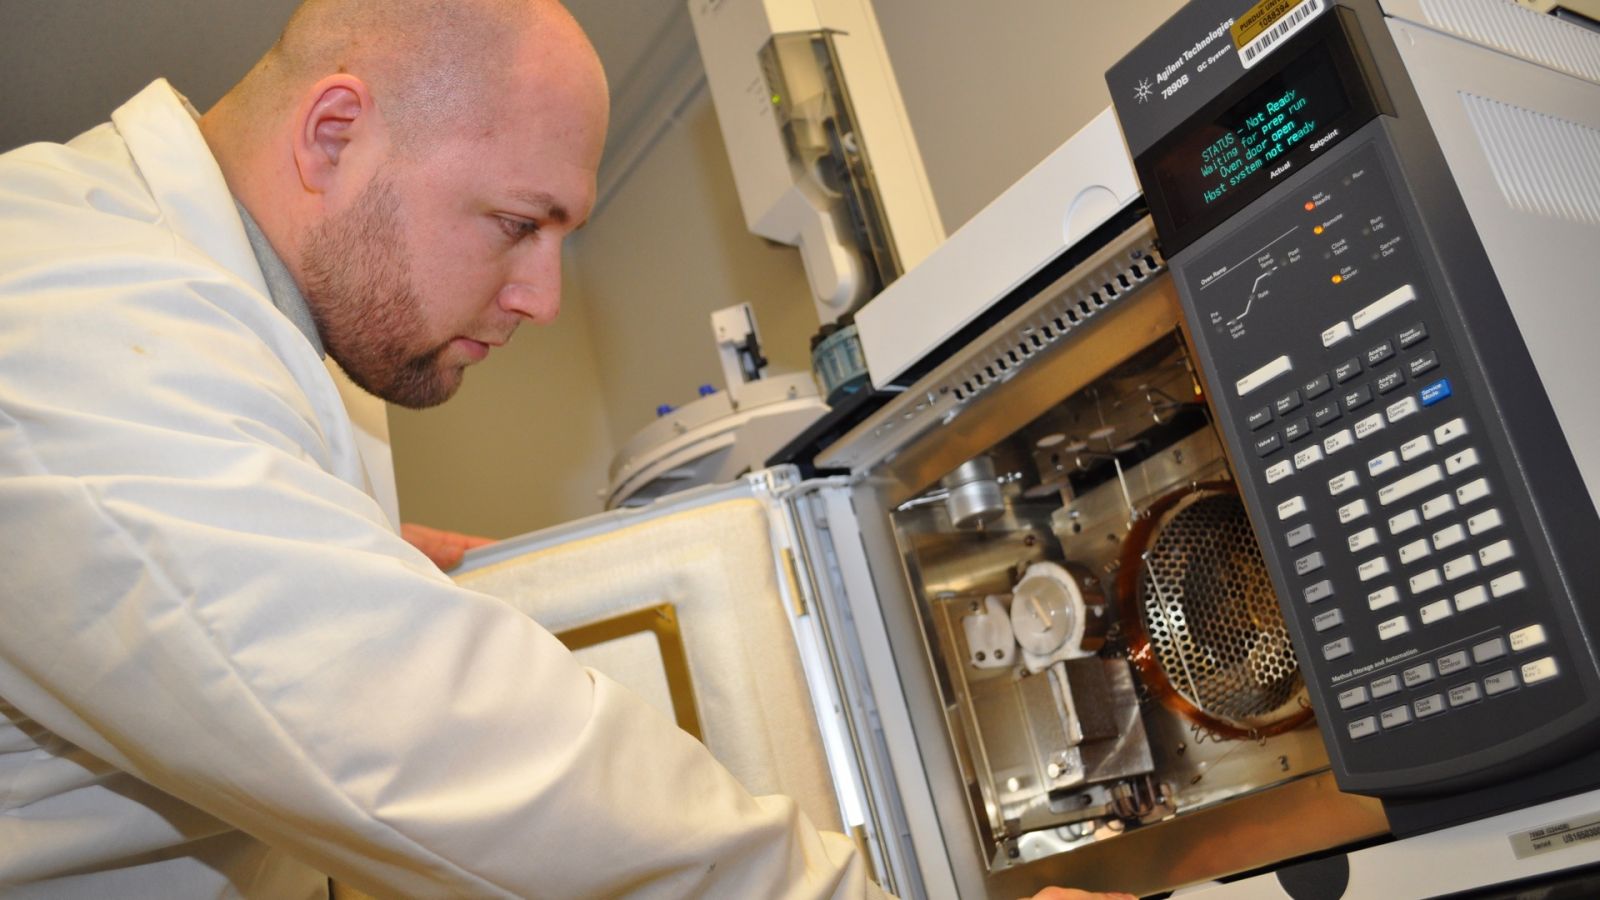 Petr Vozka works with a 2-D gas chromatograph in the FLORE lab